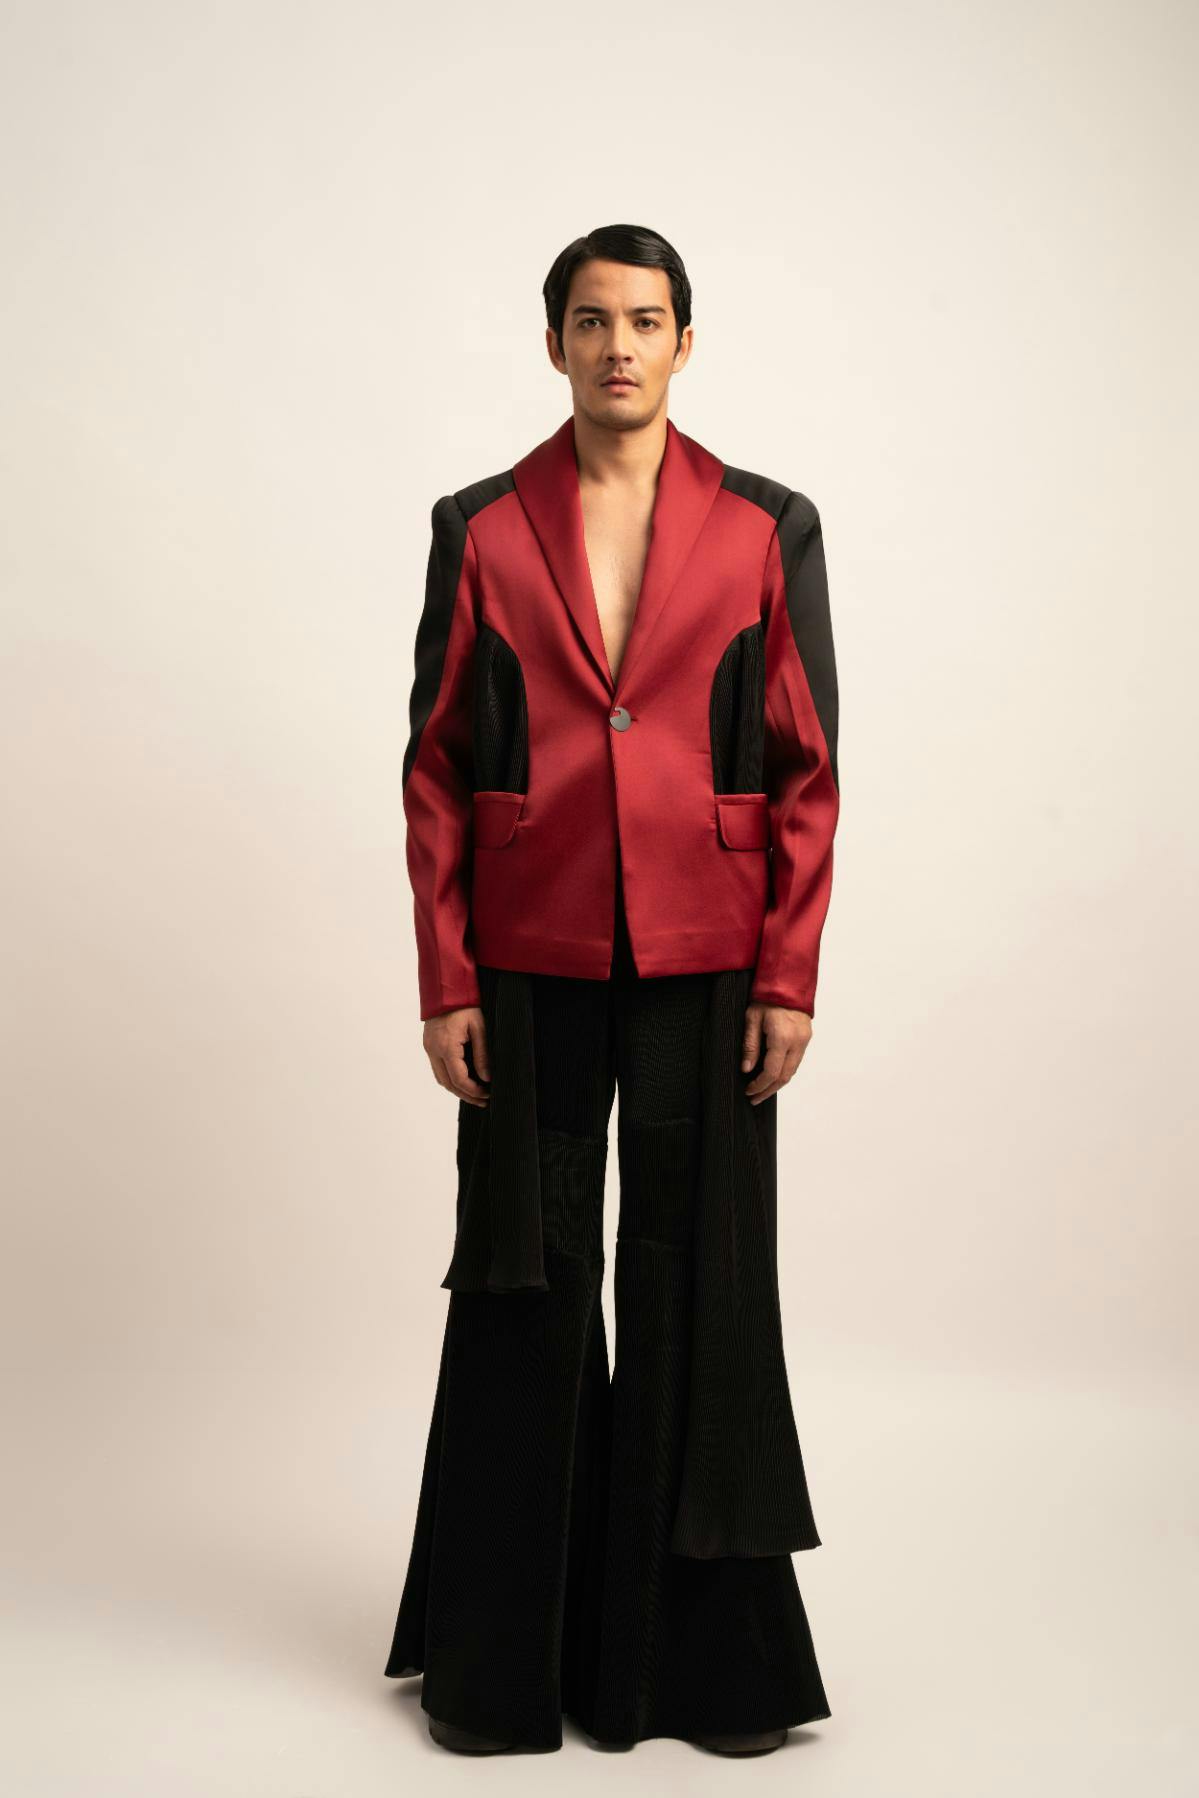 The Futurist Trousers, a product by Siddhant Agrawal Label